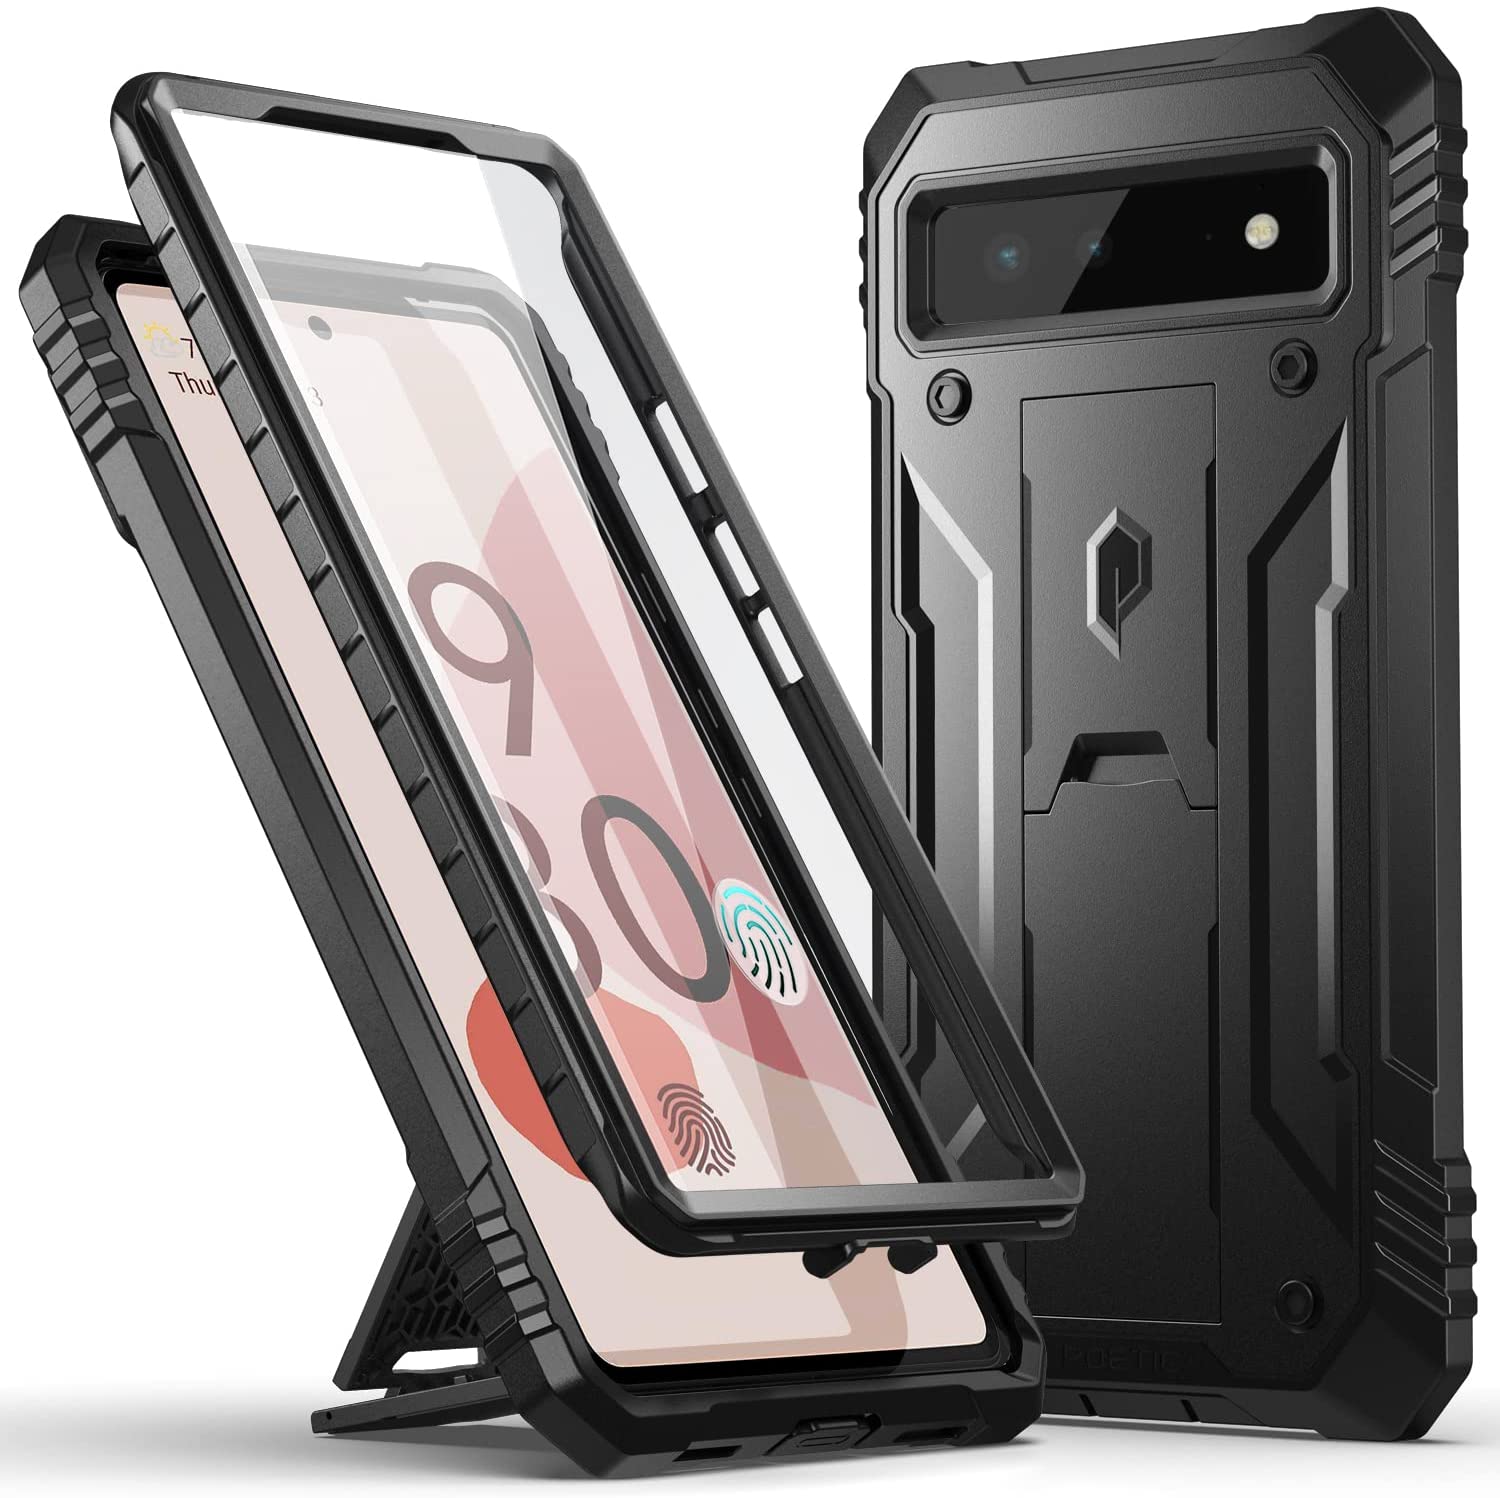 Poetic Revolution Series Case for Google Pixel 6A 5G, Built-In Screen Protector Work with Fingerprint ID, Full Body Rugged Shockproof Protective Cover